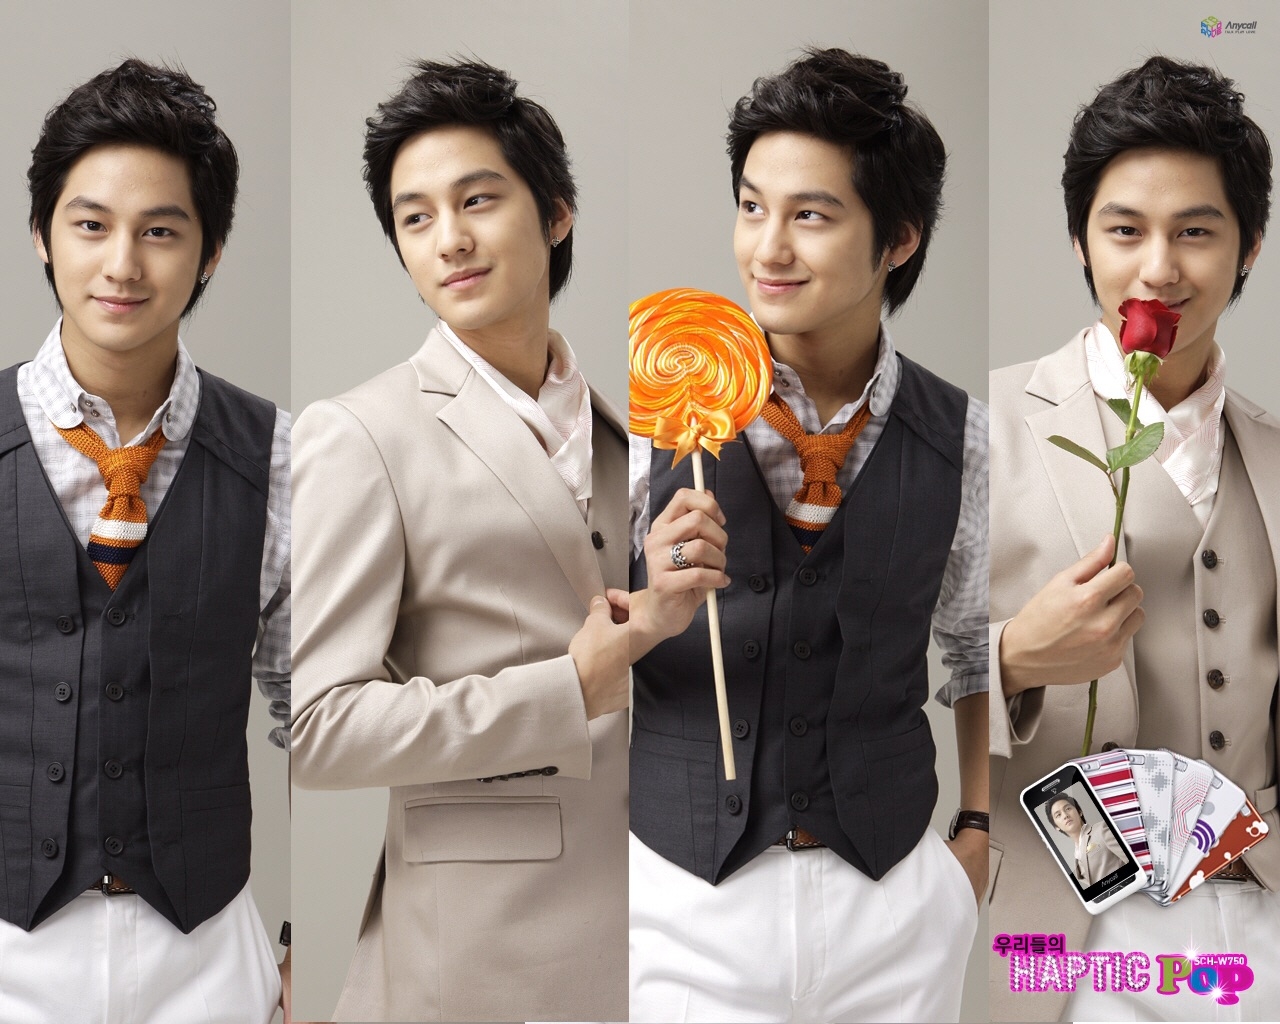 Boy Over Flowers - Boys Over Flowers , HD Wallpaper & Backgrounds